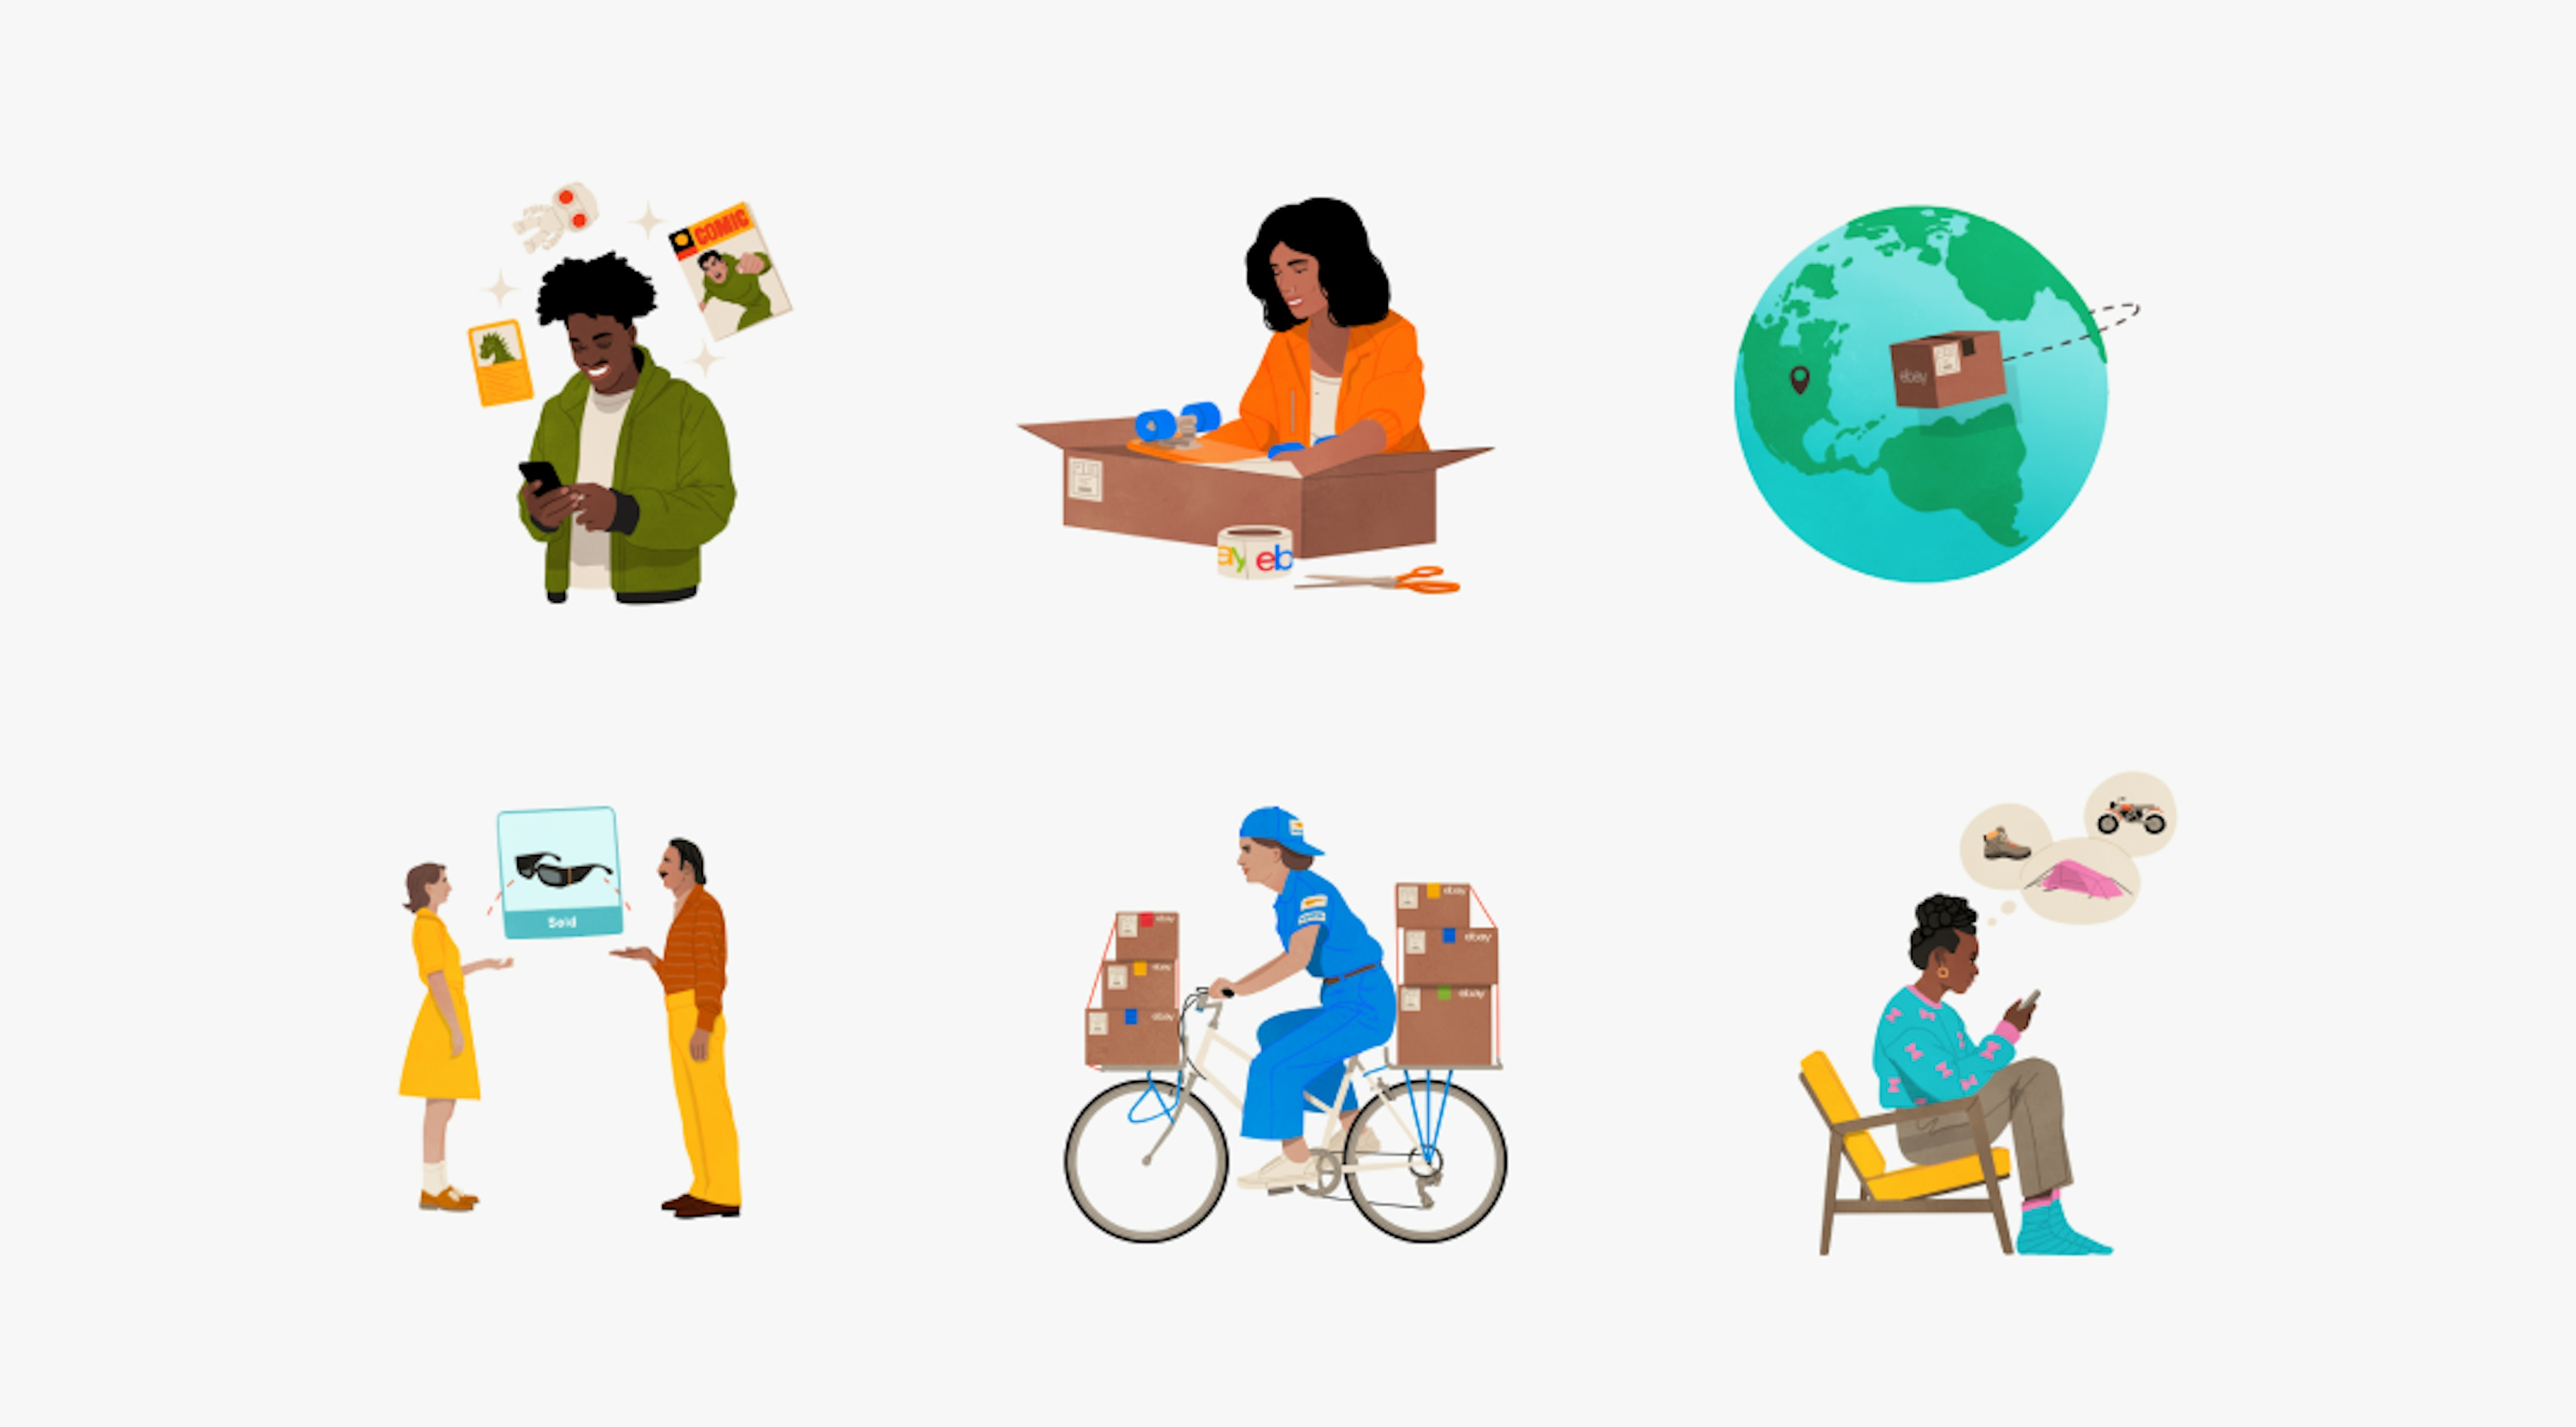 6 distinct illustrations highlighting buying and selling:
A person happily looking at their phone with various collectible items floating around them.
A person packing a box with eBay branding and tape.
A globe with a package traveling from the US to another location.
Two people exchanging a pair of sunglasses, indicating a sale.
A delivery person on a bicycle with packages marked "eBay."
A person sitting and browsing items on their phone, thinking about shoes, a bike, and a tent.